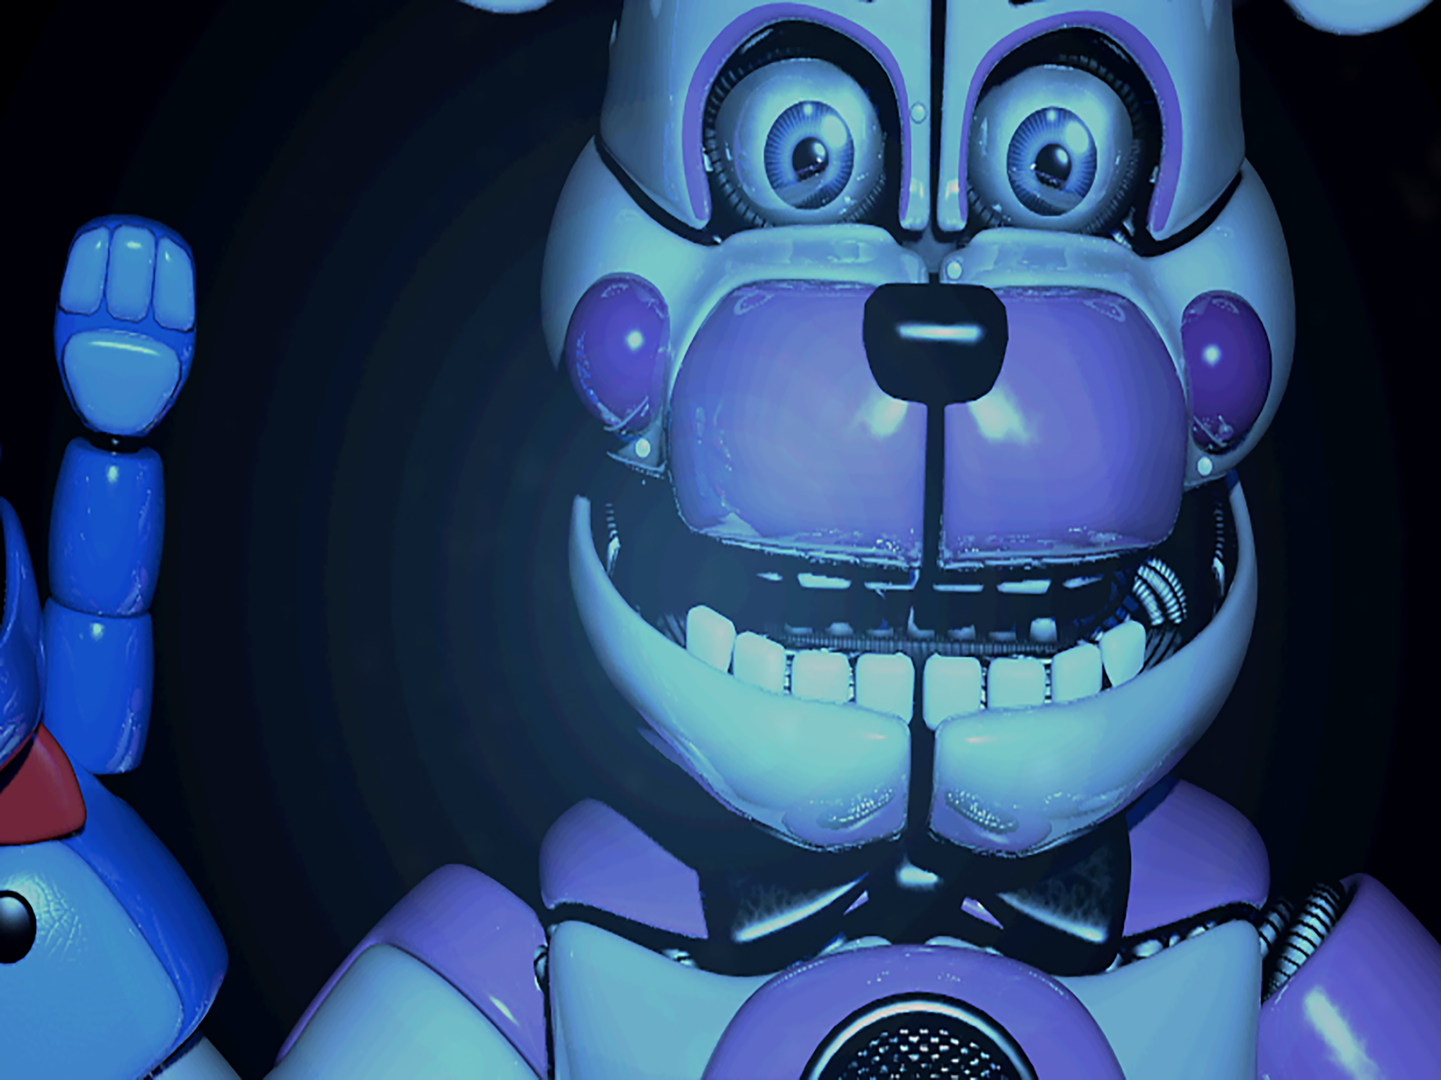 Five Nights at Freddy's App Review